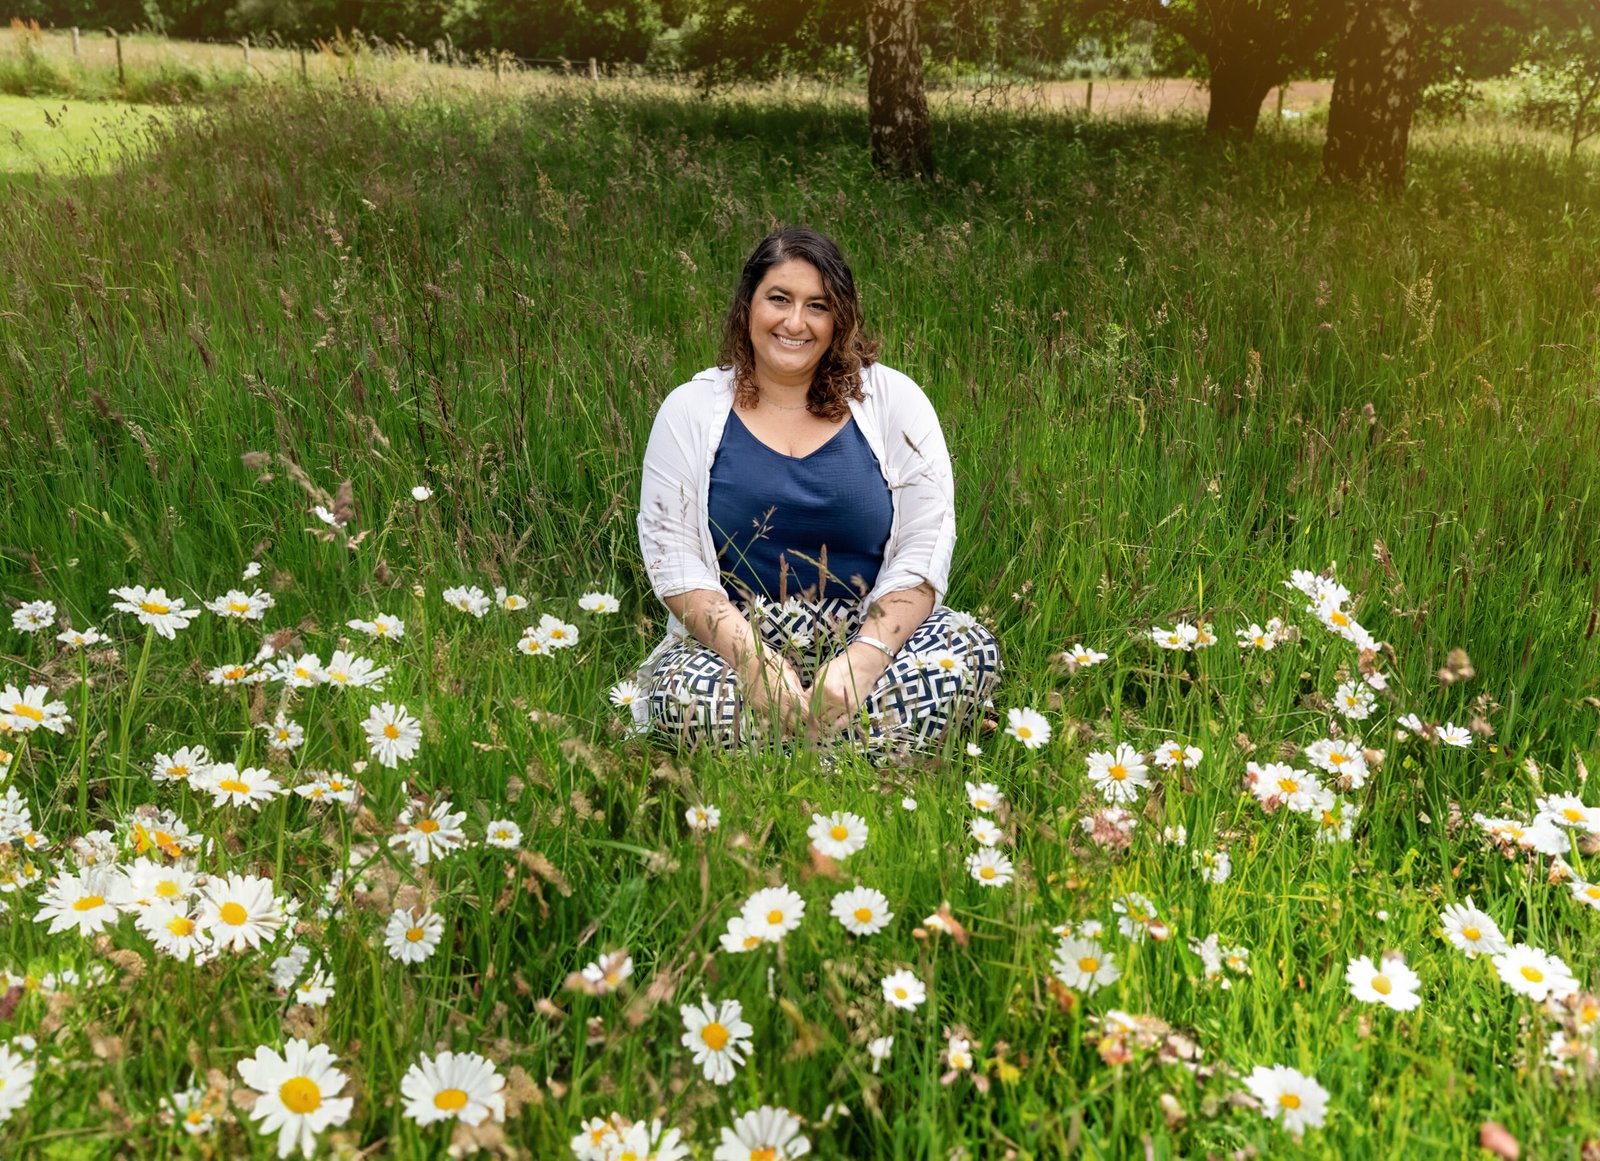 Louiza Leneghan, founder of Empowering Minds, sitting in a field of daisies, smiling warmly.